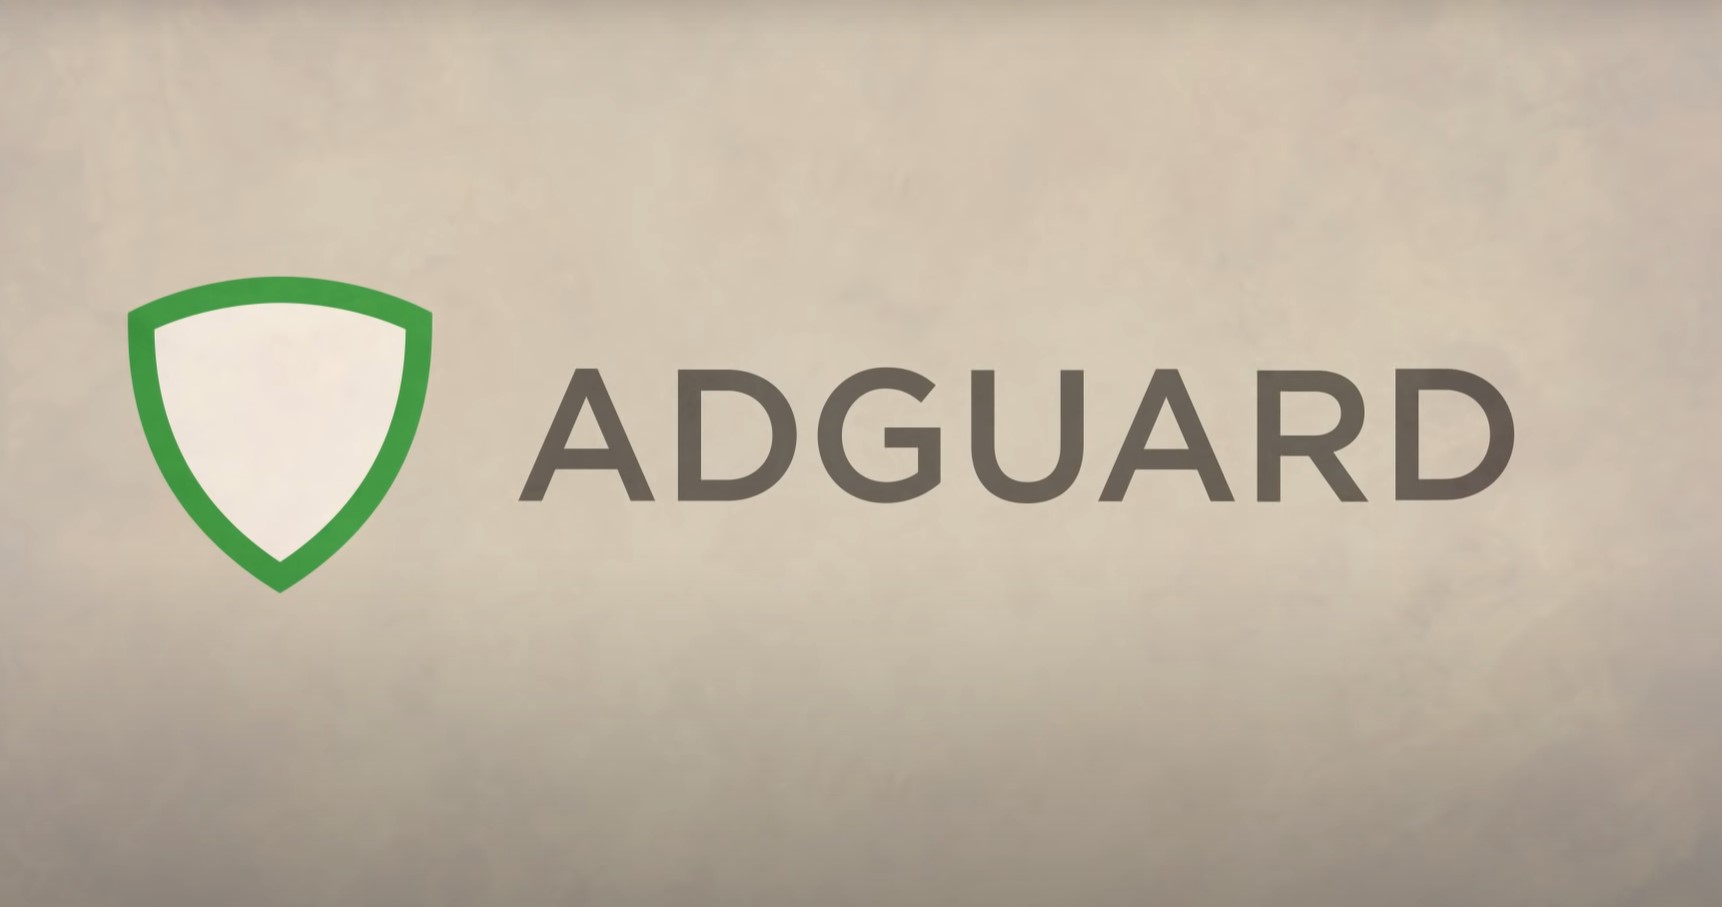 Block ads on Windows, Android, Mac, iOS with AdGuard and whitelist apps